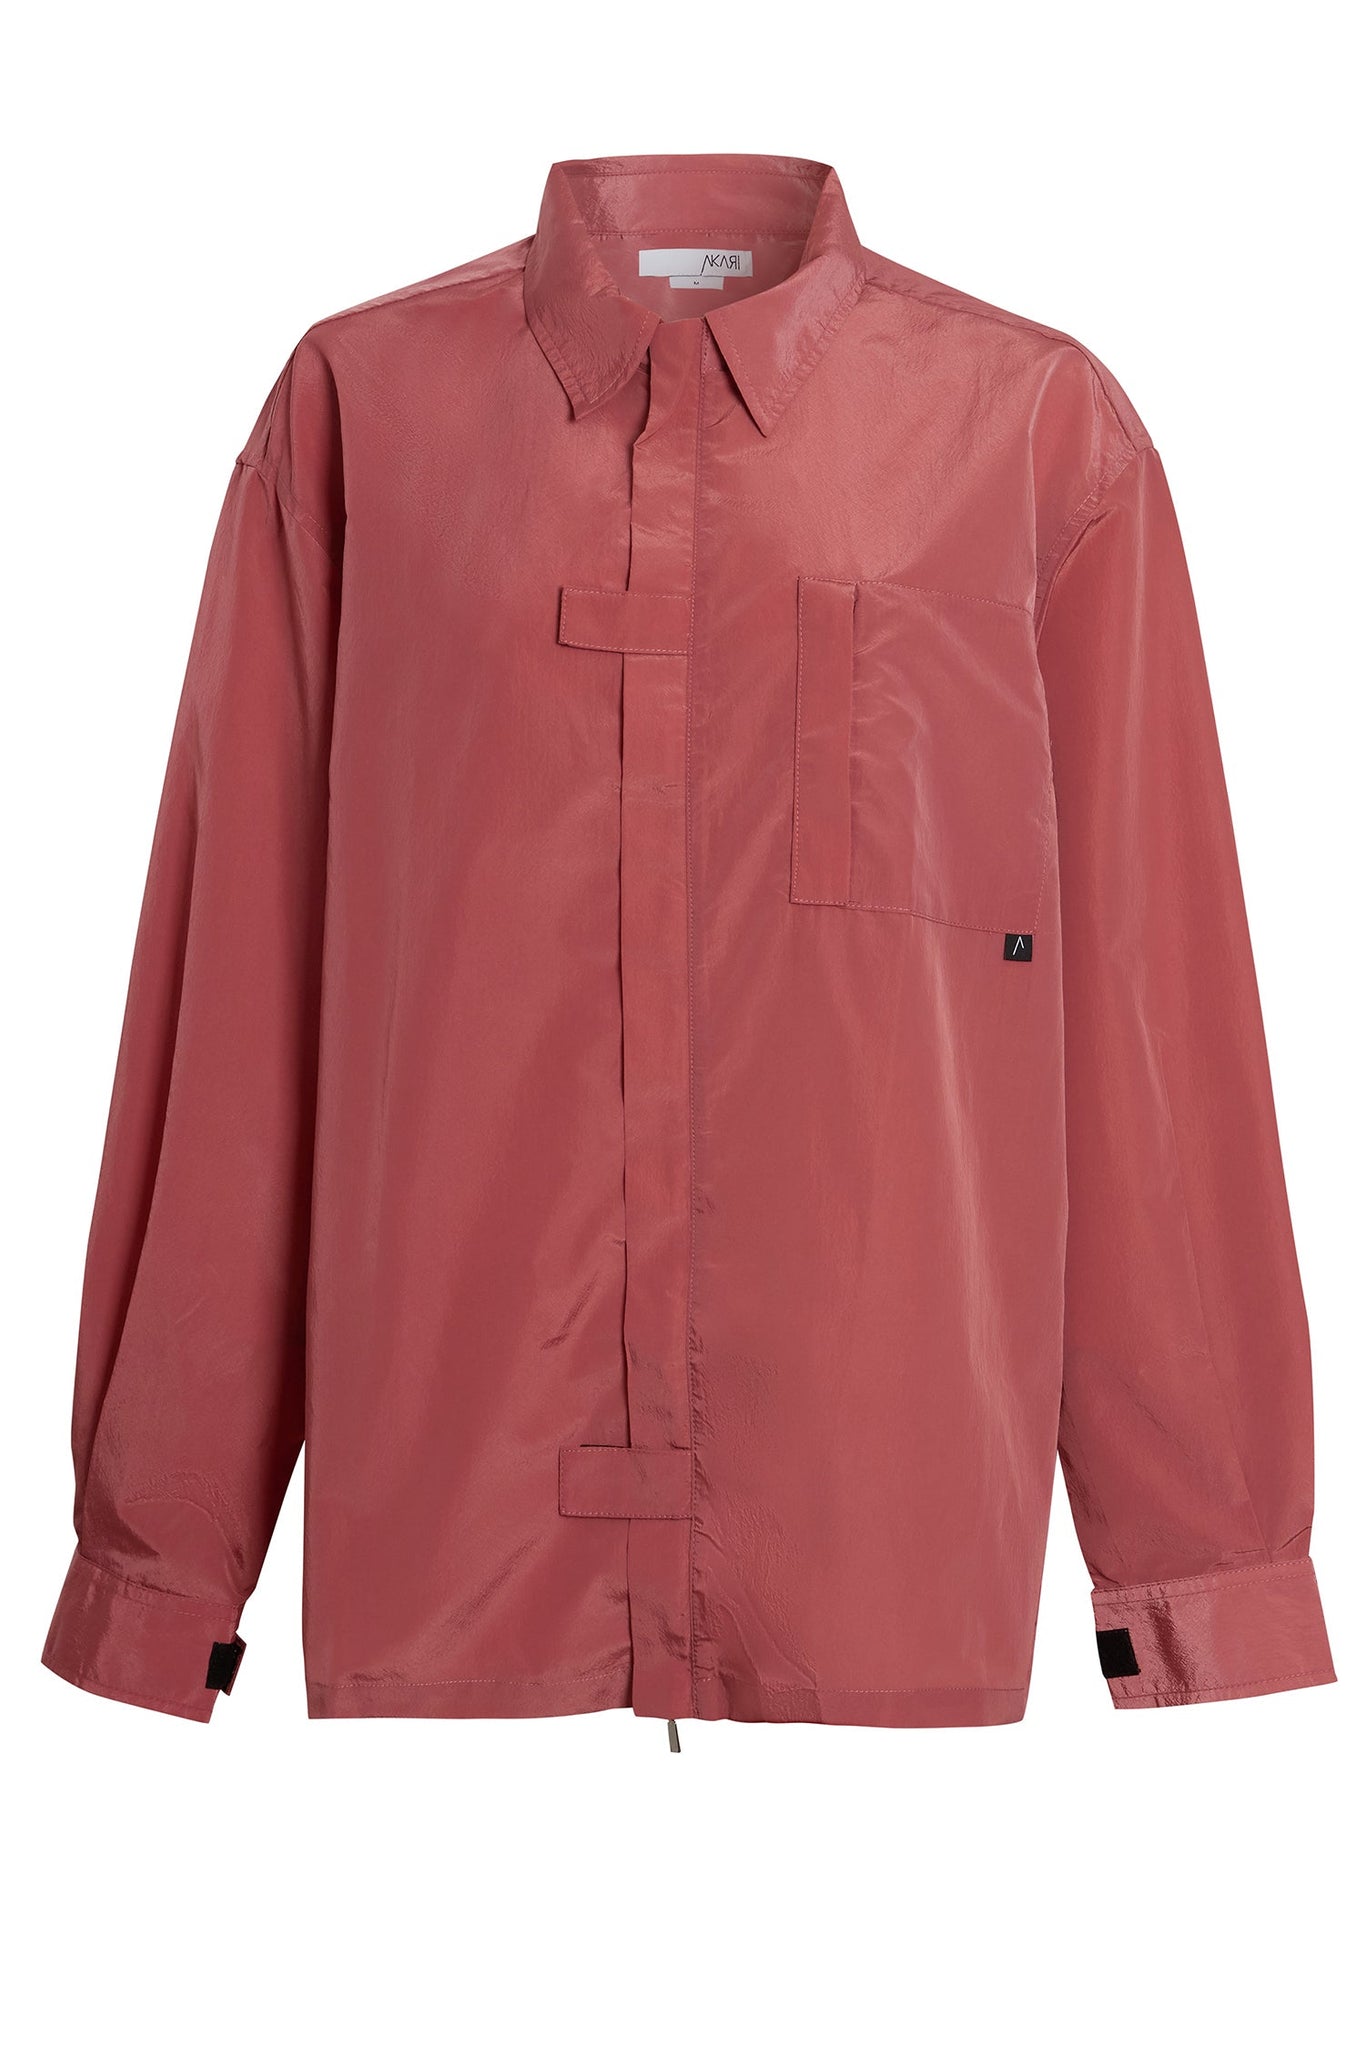 OVERactiveD STRUCTURED SHIRT WITH ZIP POCKET